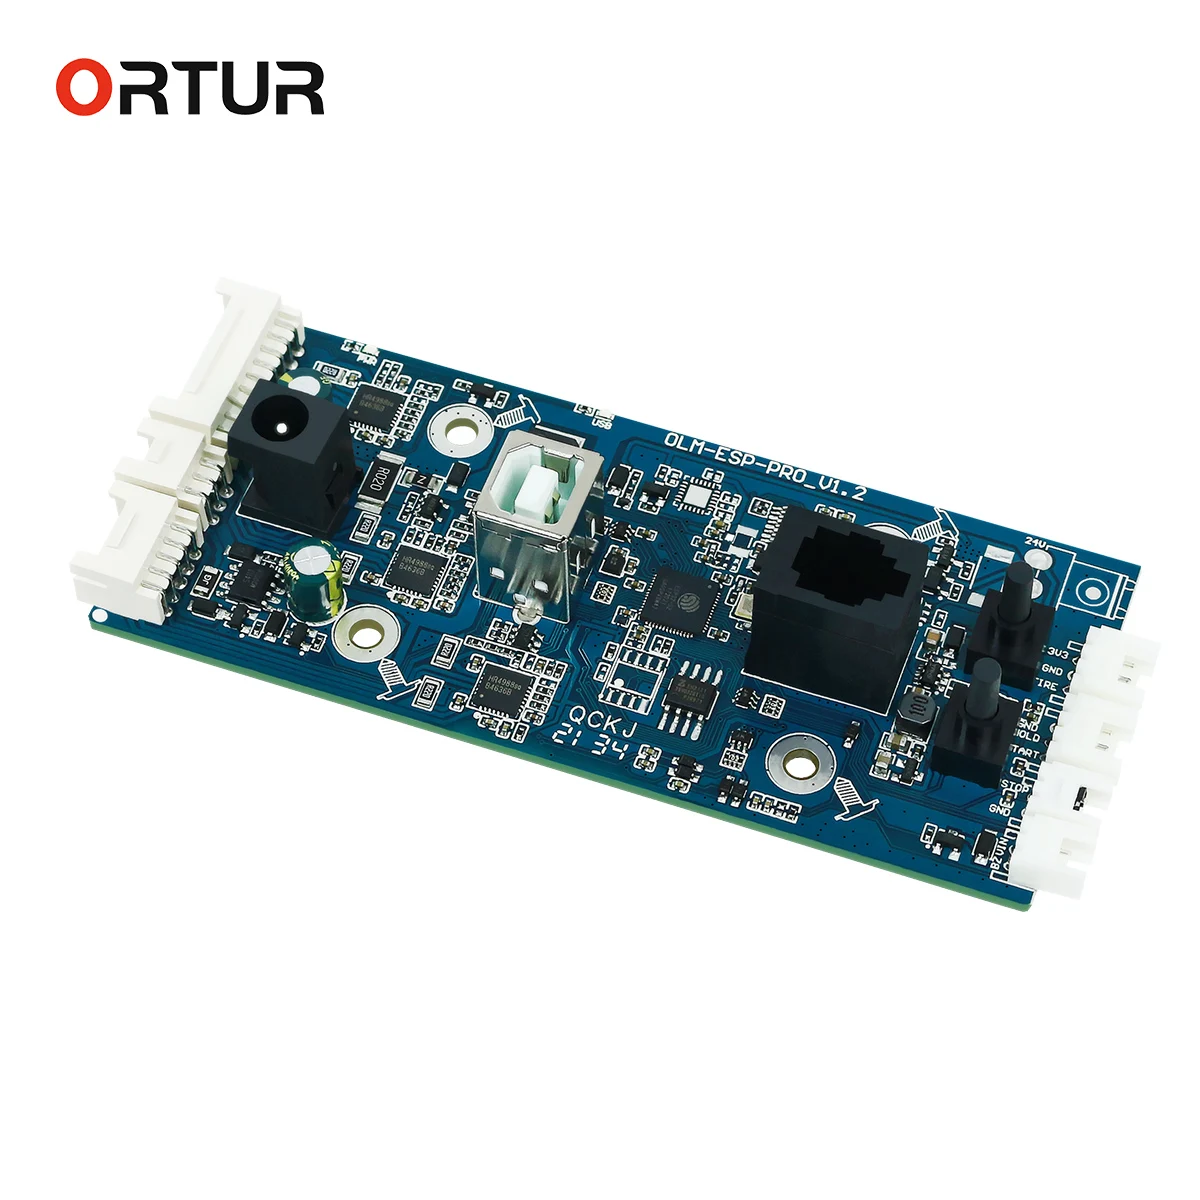 

ORTUR Original 32-bit Motherboard with 32B MCU for Ortur / Aufero Laser Engravers Replacement Mainboard for Laser Machines